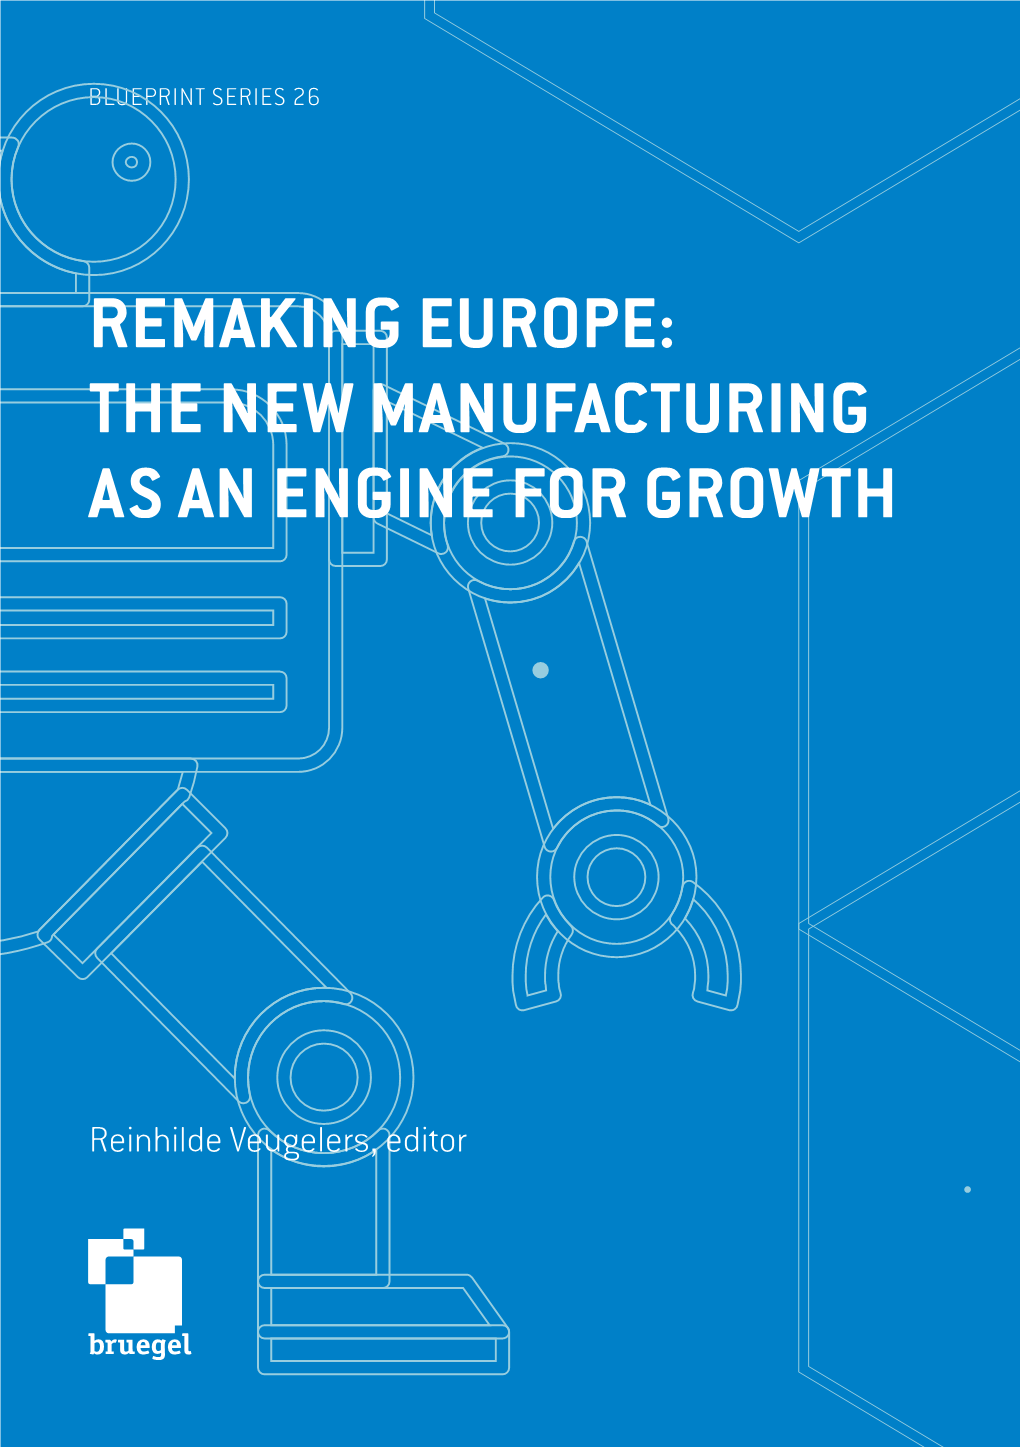 Remaking Europe: the New Manufacturing As an Engine for Growth